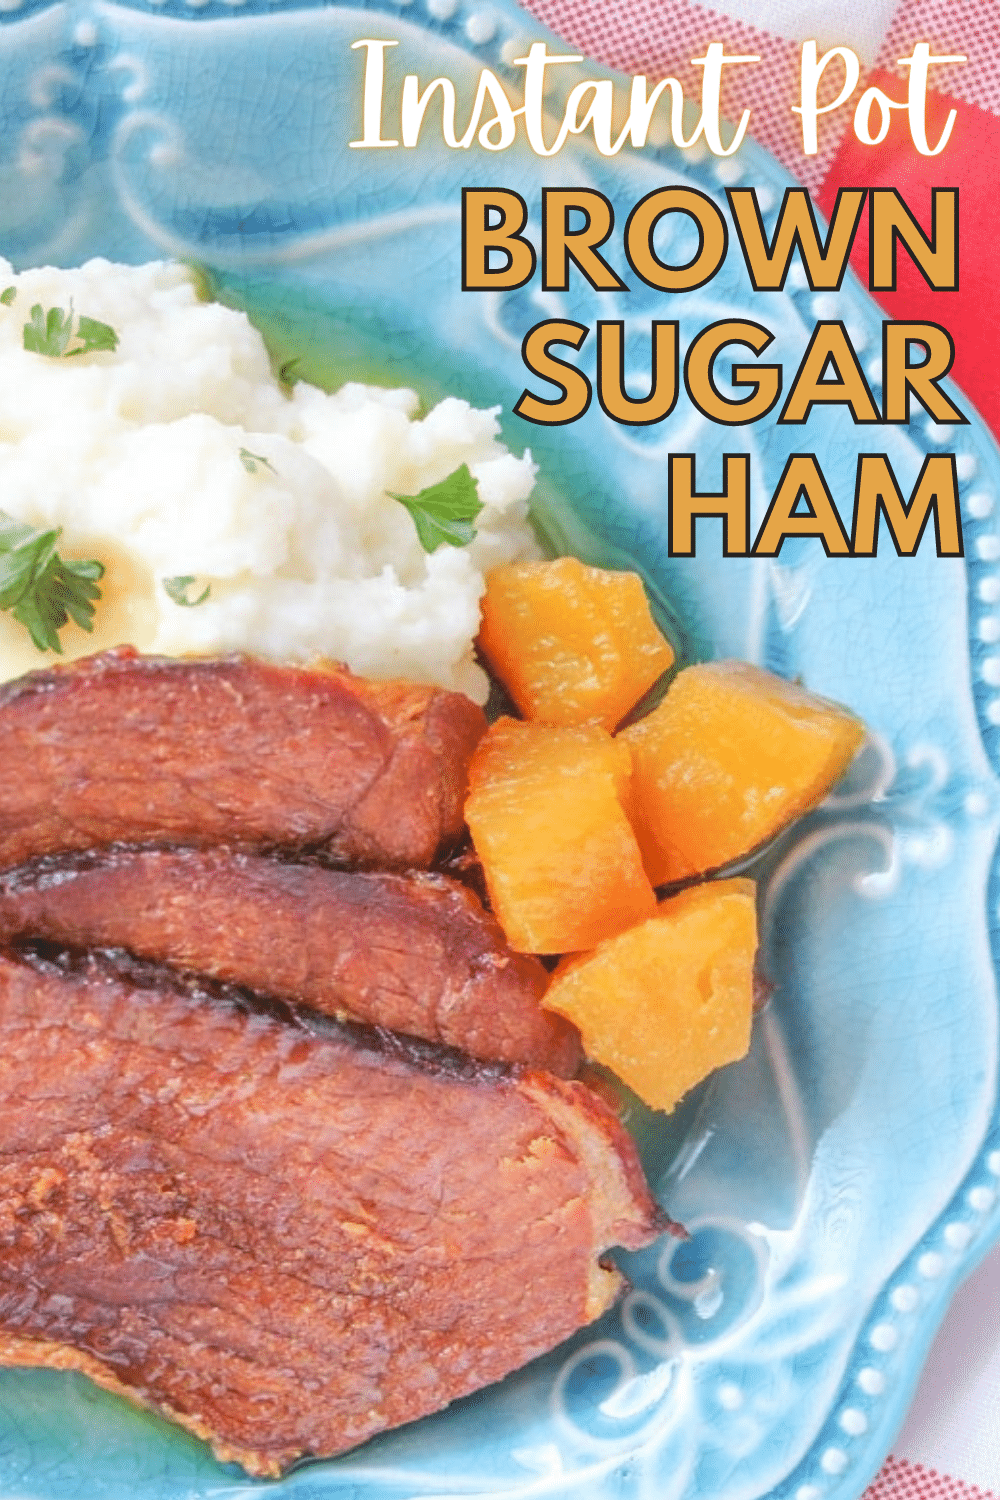 This Instant Pot Brown Sugar Ham is the perfect main dish for Sunday or holiday dinners. You won't believe how easy it is! #instantpot #ham #easydinner #easyrecipes #pressurecooker via @wondermomwannab